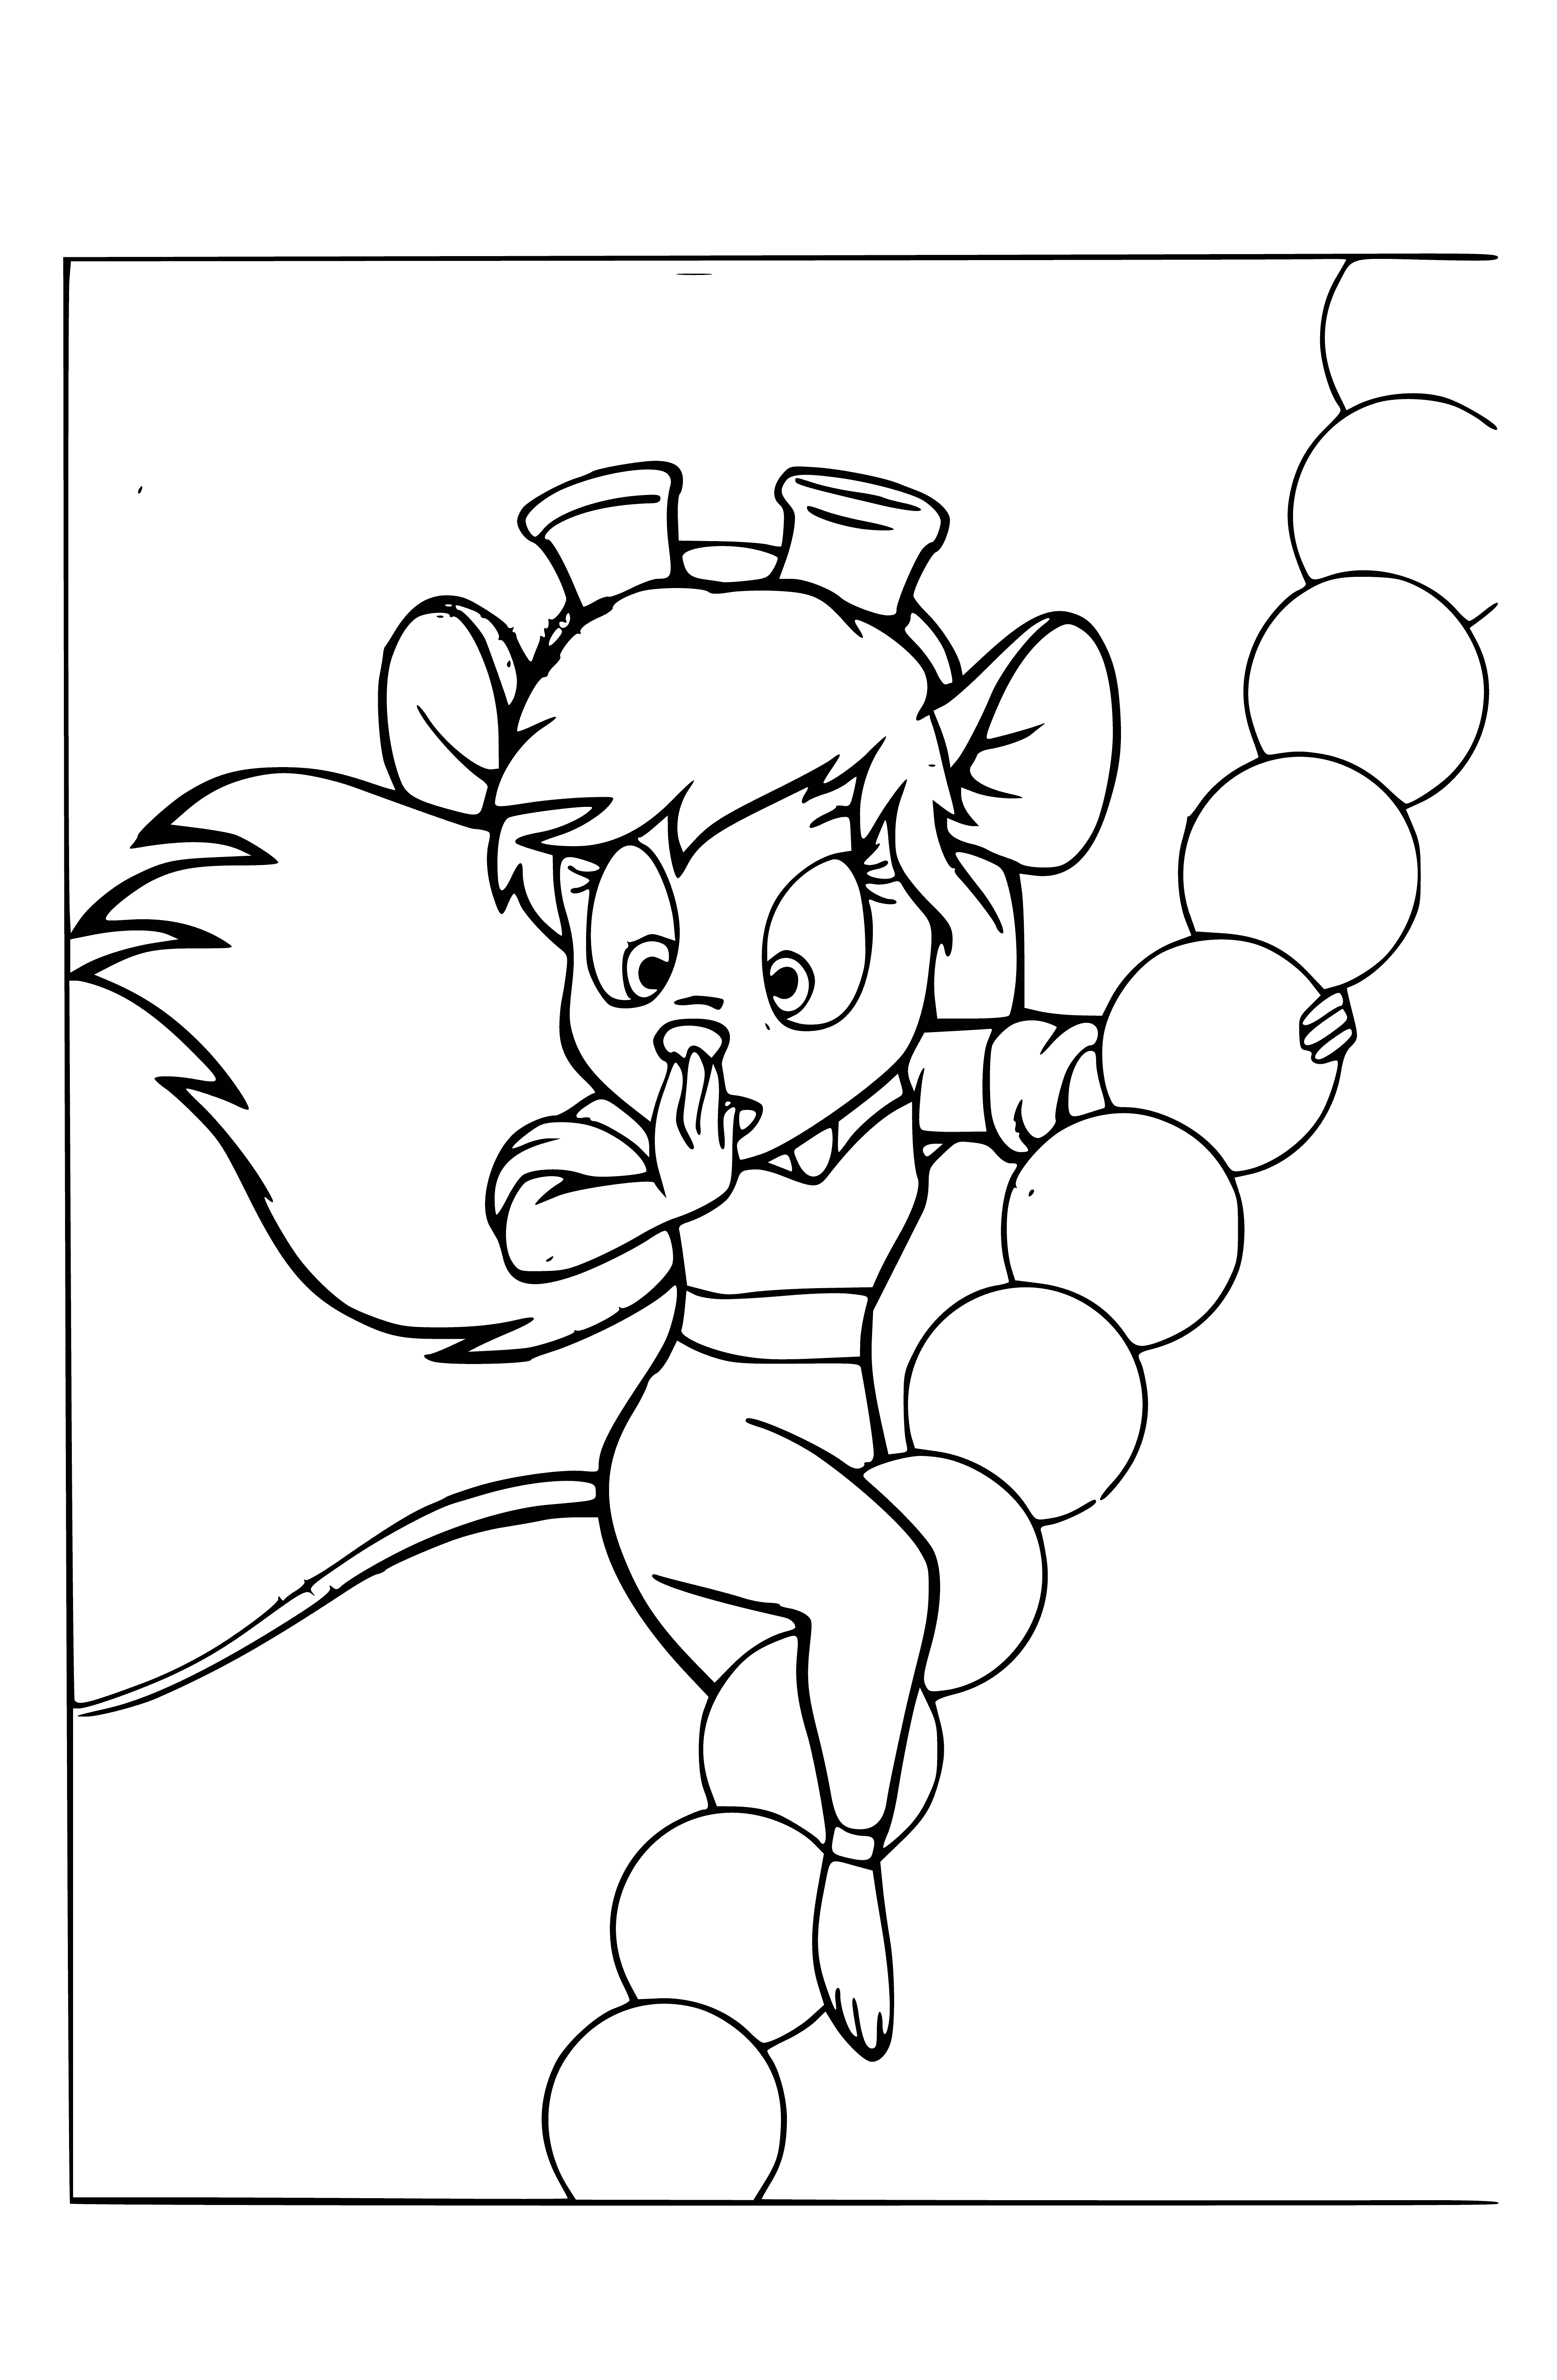 coloring page: Two tan rodents explore an acorn & blue bead necklace in this coloring page.